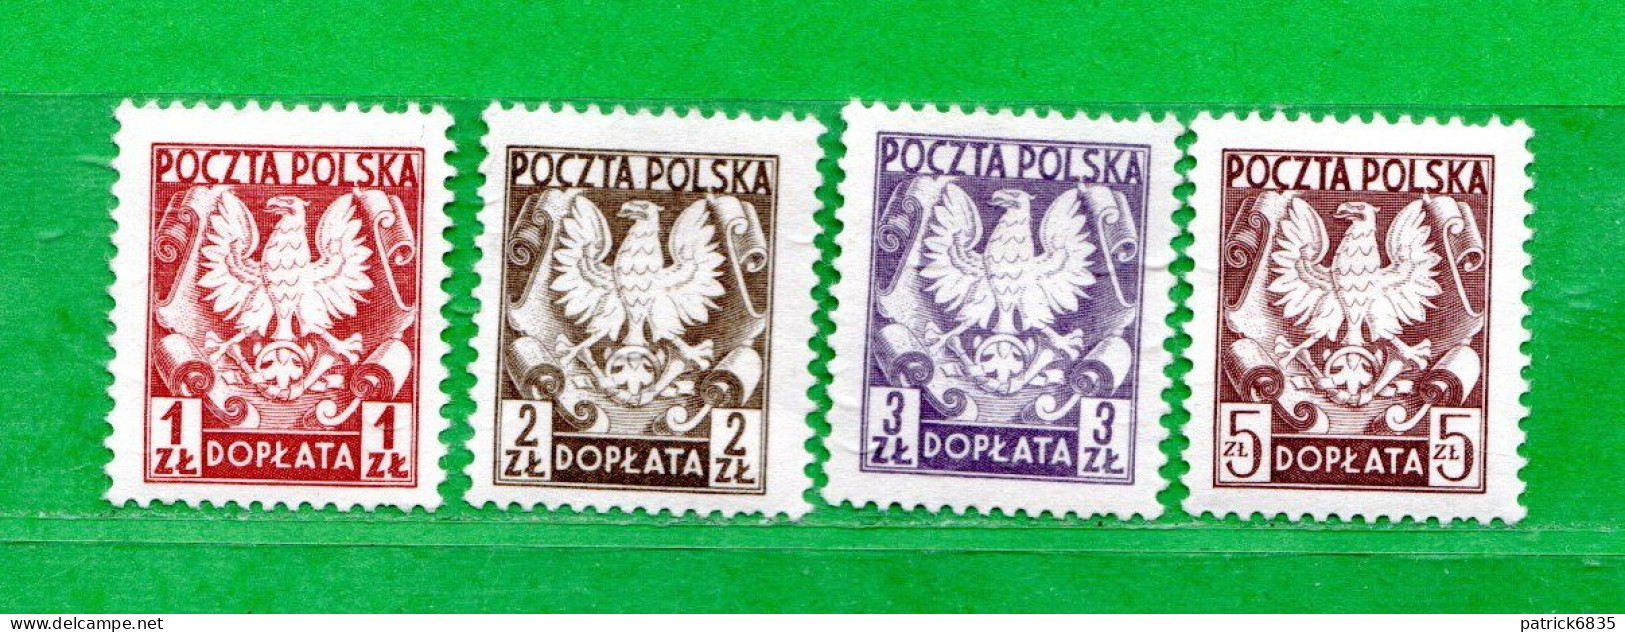 (N) POLONIA ** - SEGNATASSE - TAXE - 1980 -  Yv. 146 à 149 .  MNH** Come Scansione - Strafport